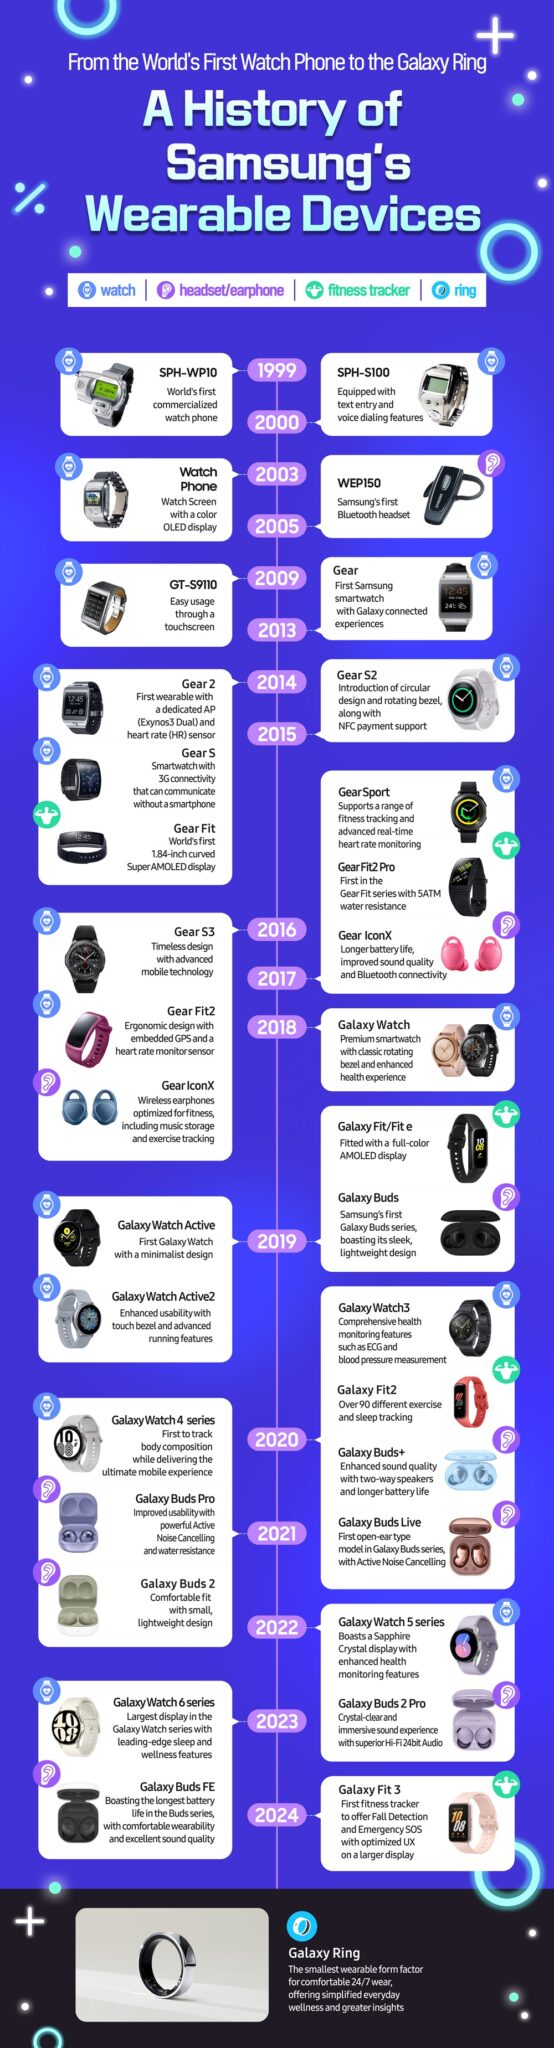 [Infographic] From the World’s First Watch Phone to Galaxy Ring: The History of Samsung’s Wearable Devices